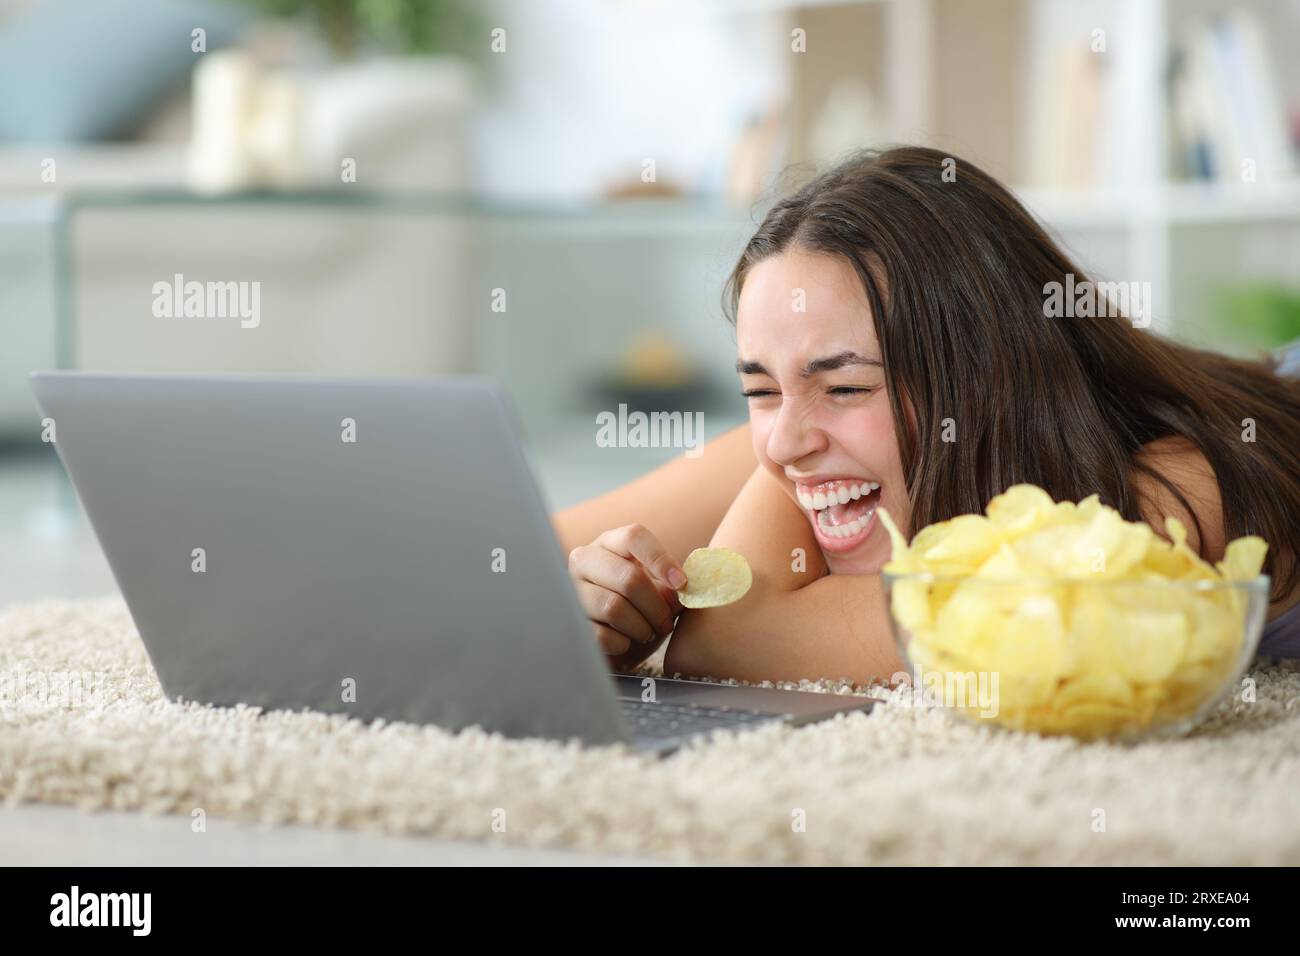 Funny woman watching media on laptop eating chips laughing hilariously at home Stock Photo